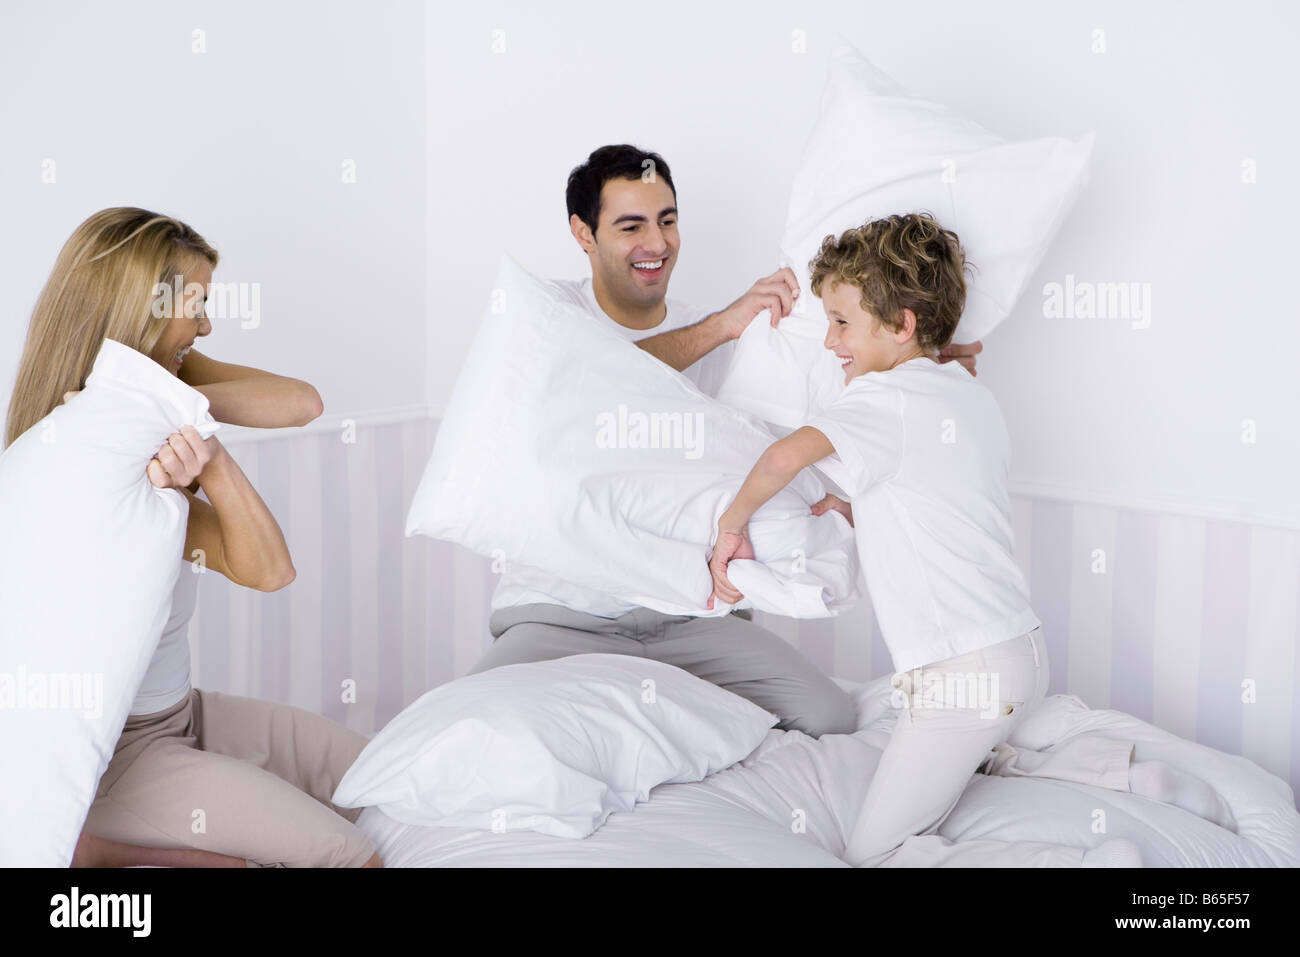 Family having pillow fight on bed Stock Photo